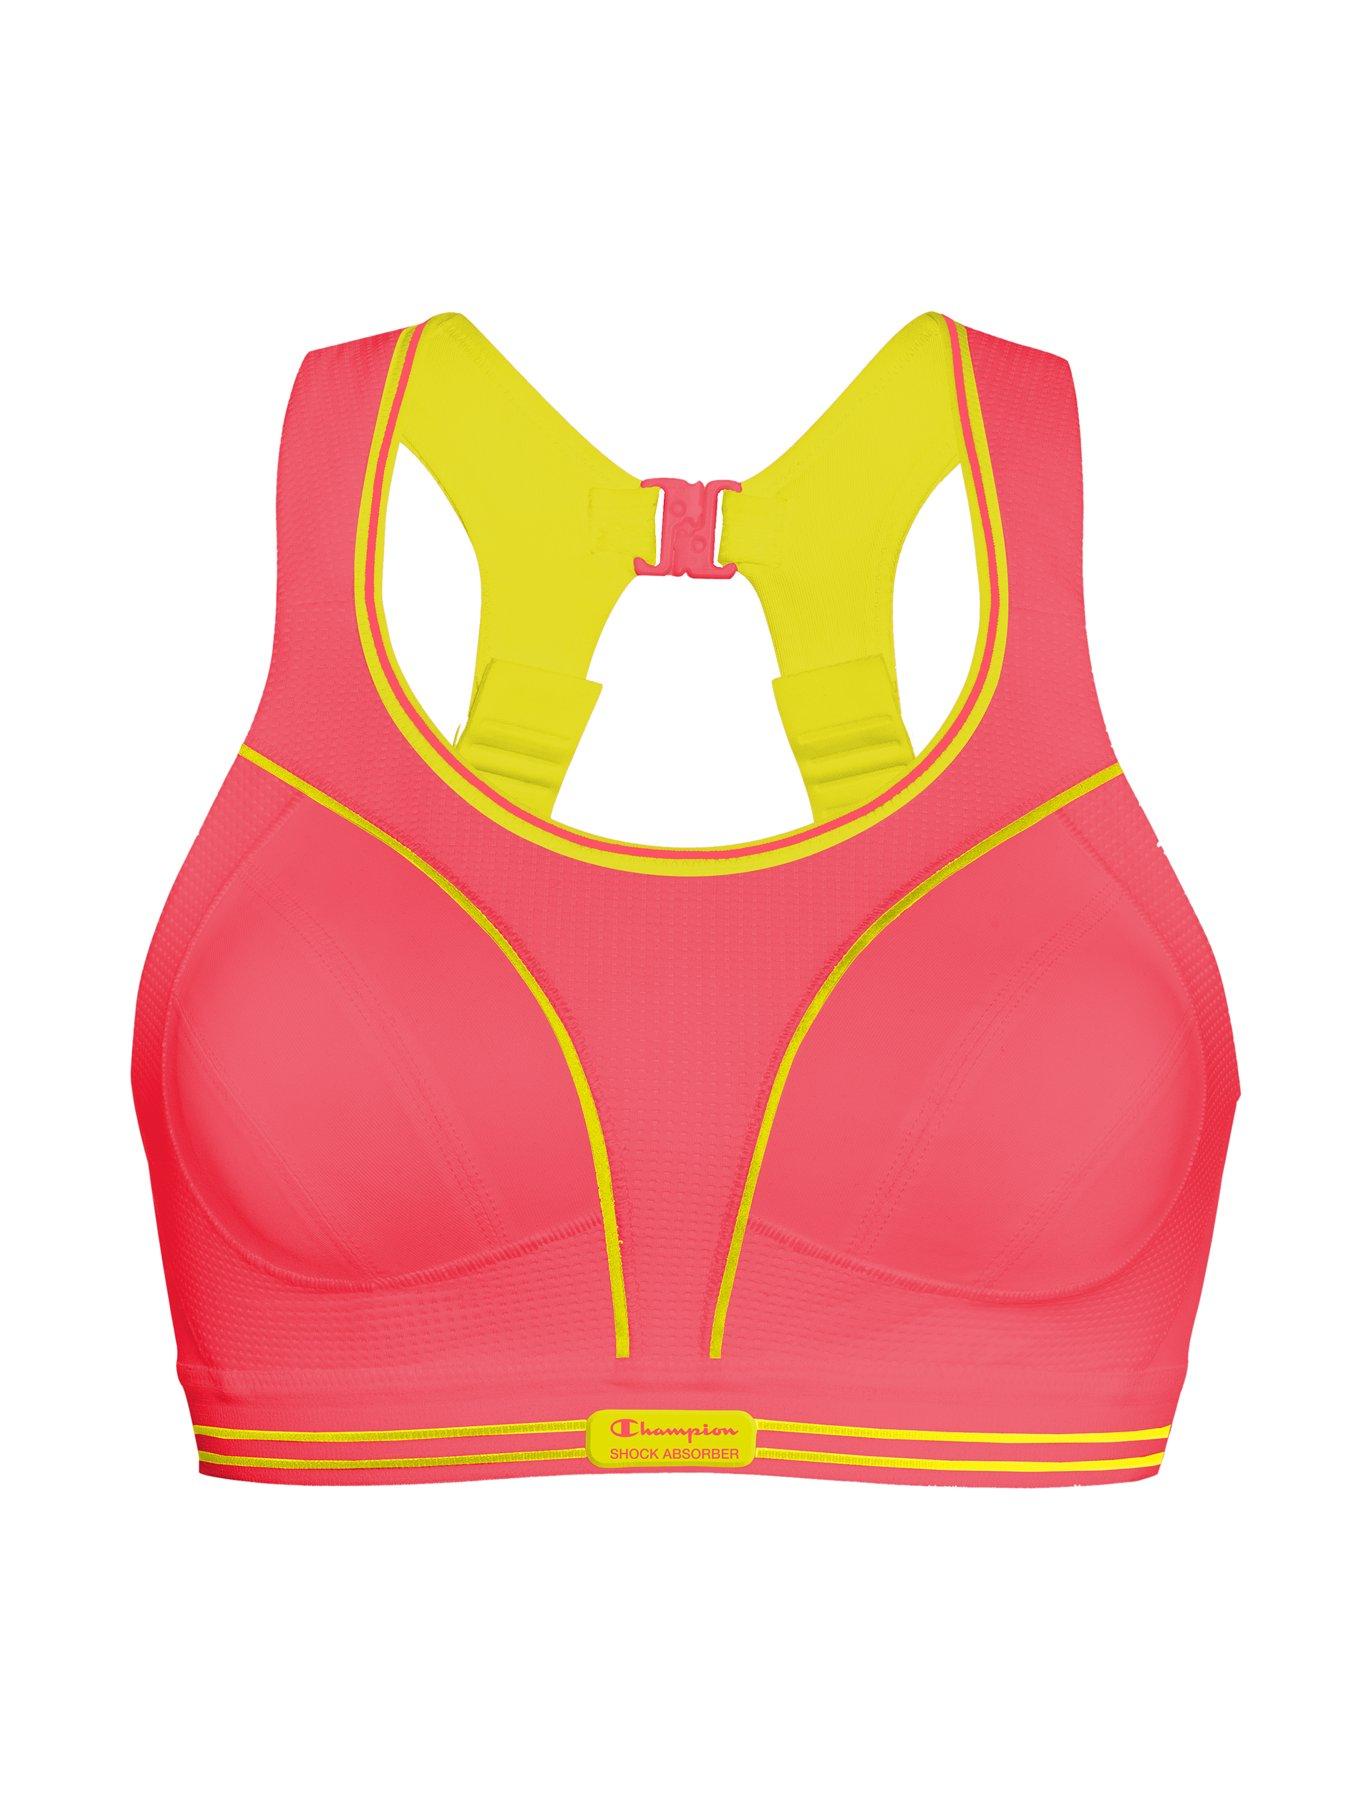 A Quick Up Close View of the Shock Absorber Ultimate Run Bra